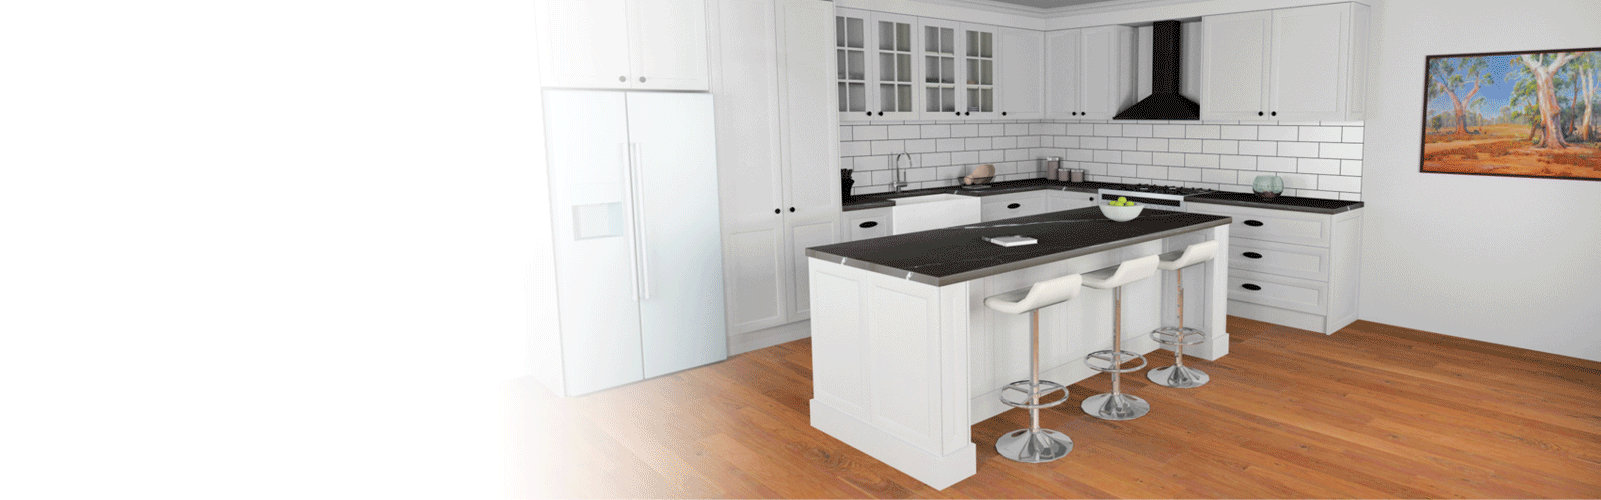 Cabinet Makers Automated Software 3D Kitchen Design Software